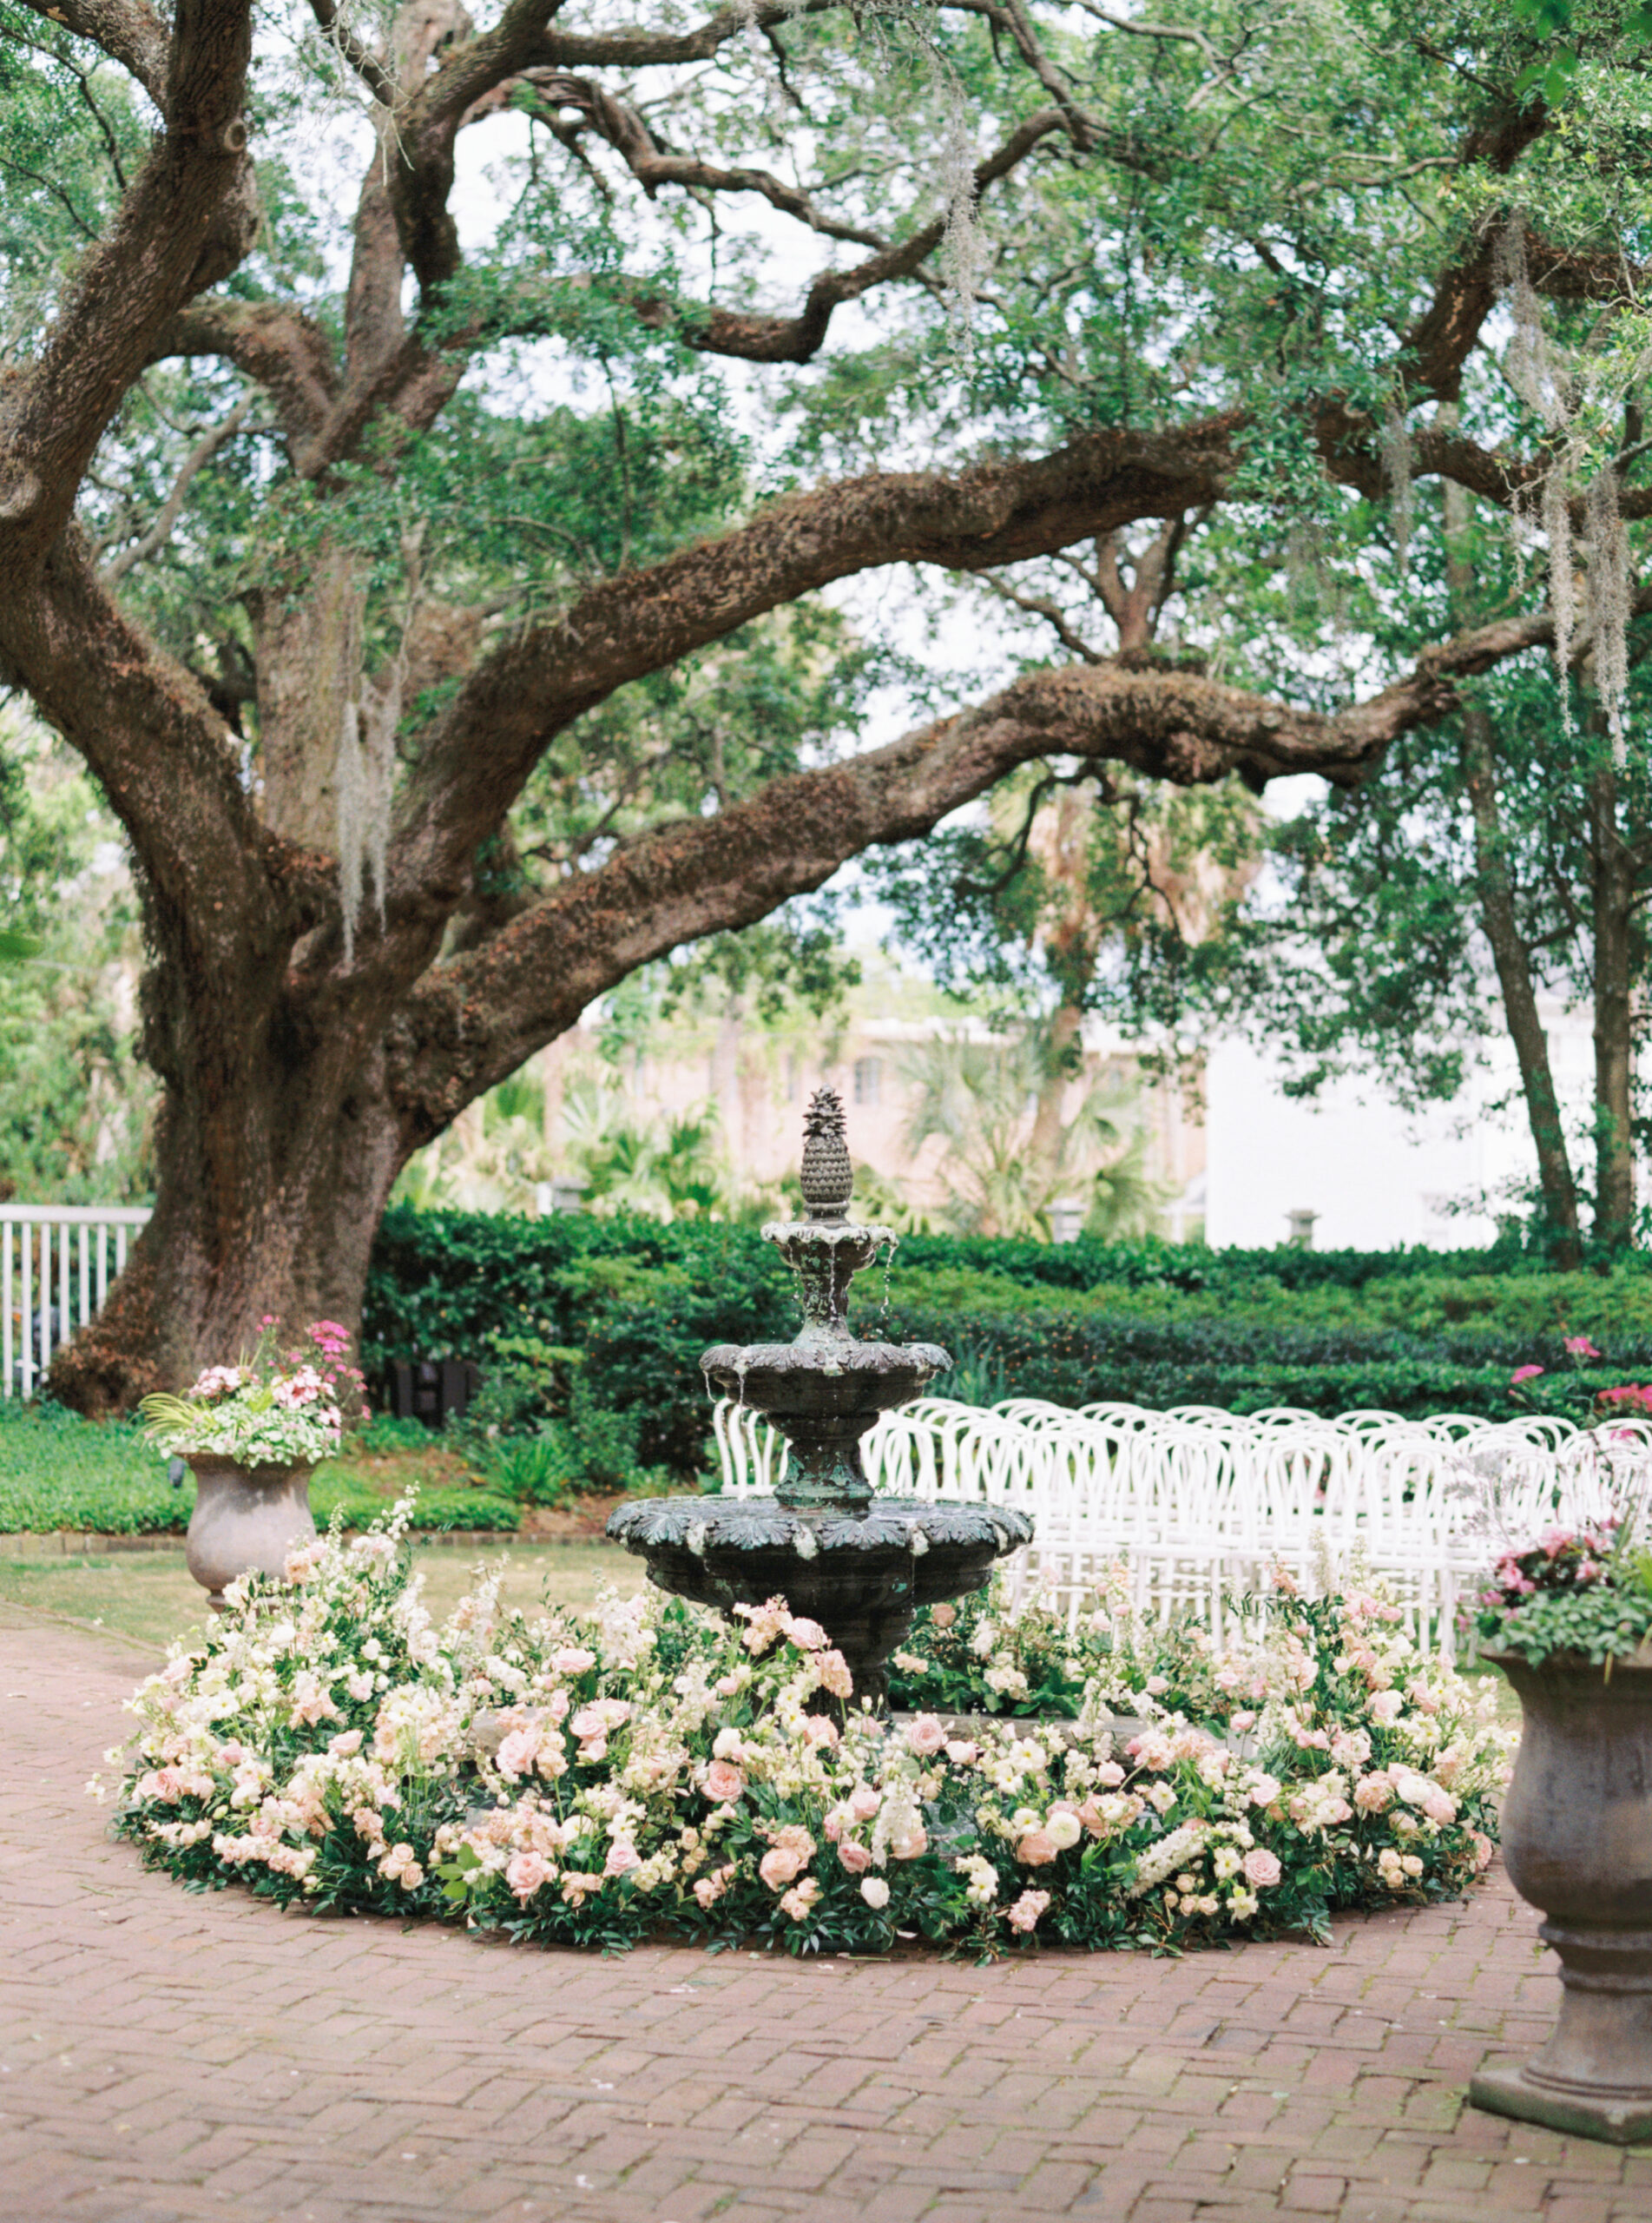 Film photo of thomas bennett house fountain decorated in white and pink flowers. 